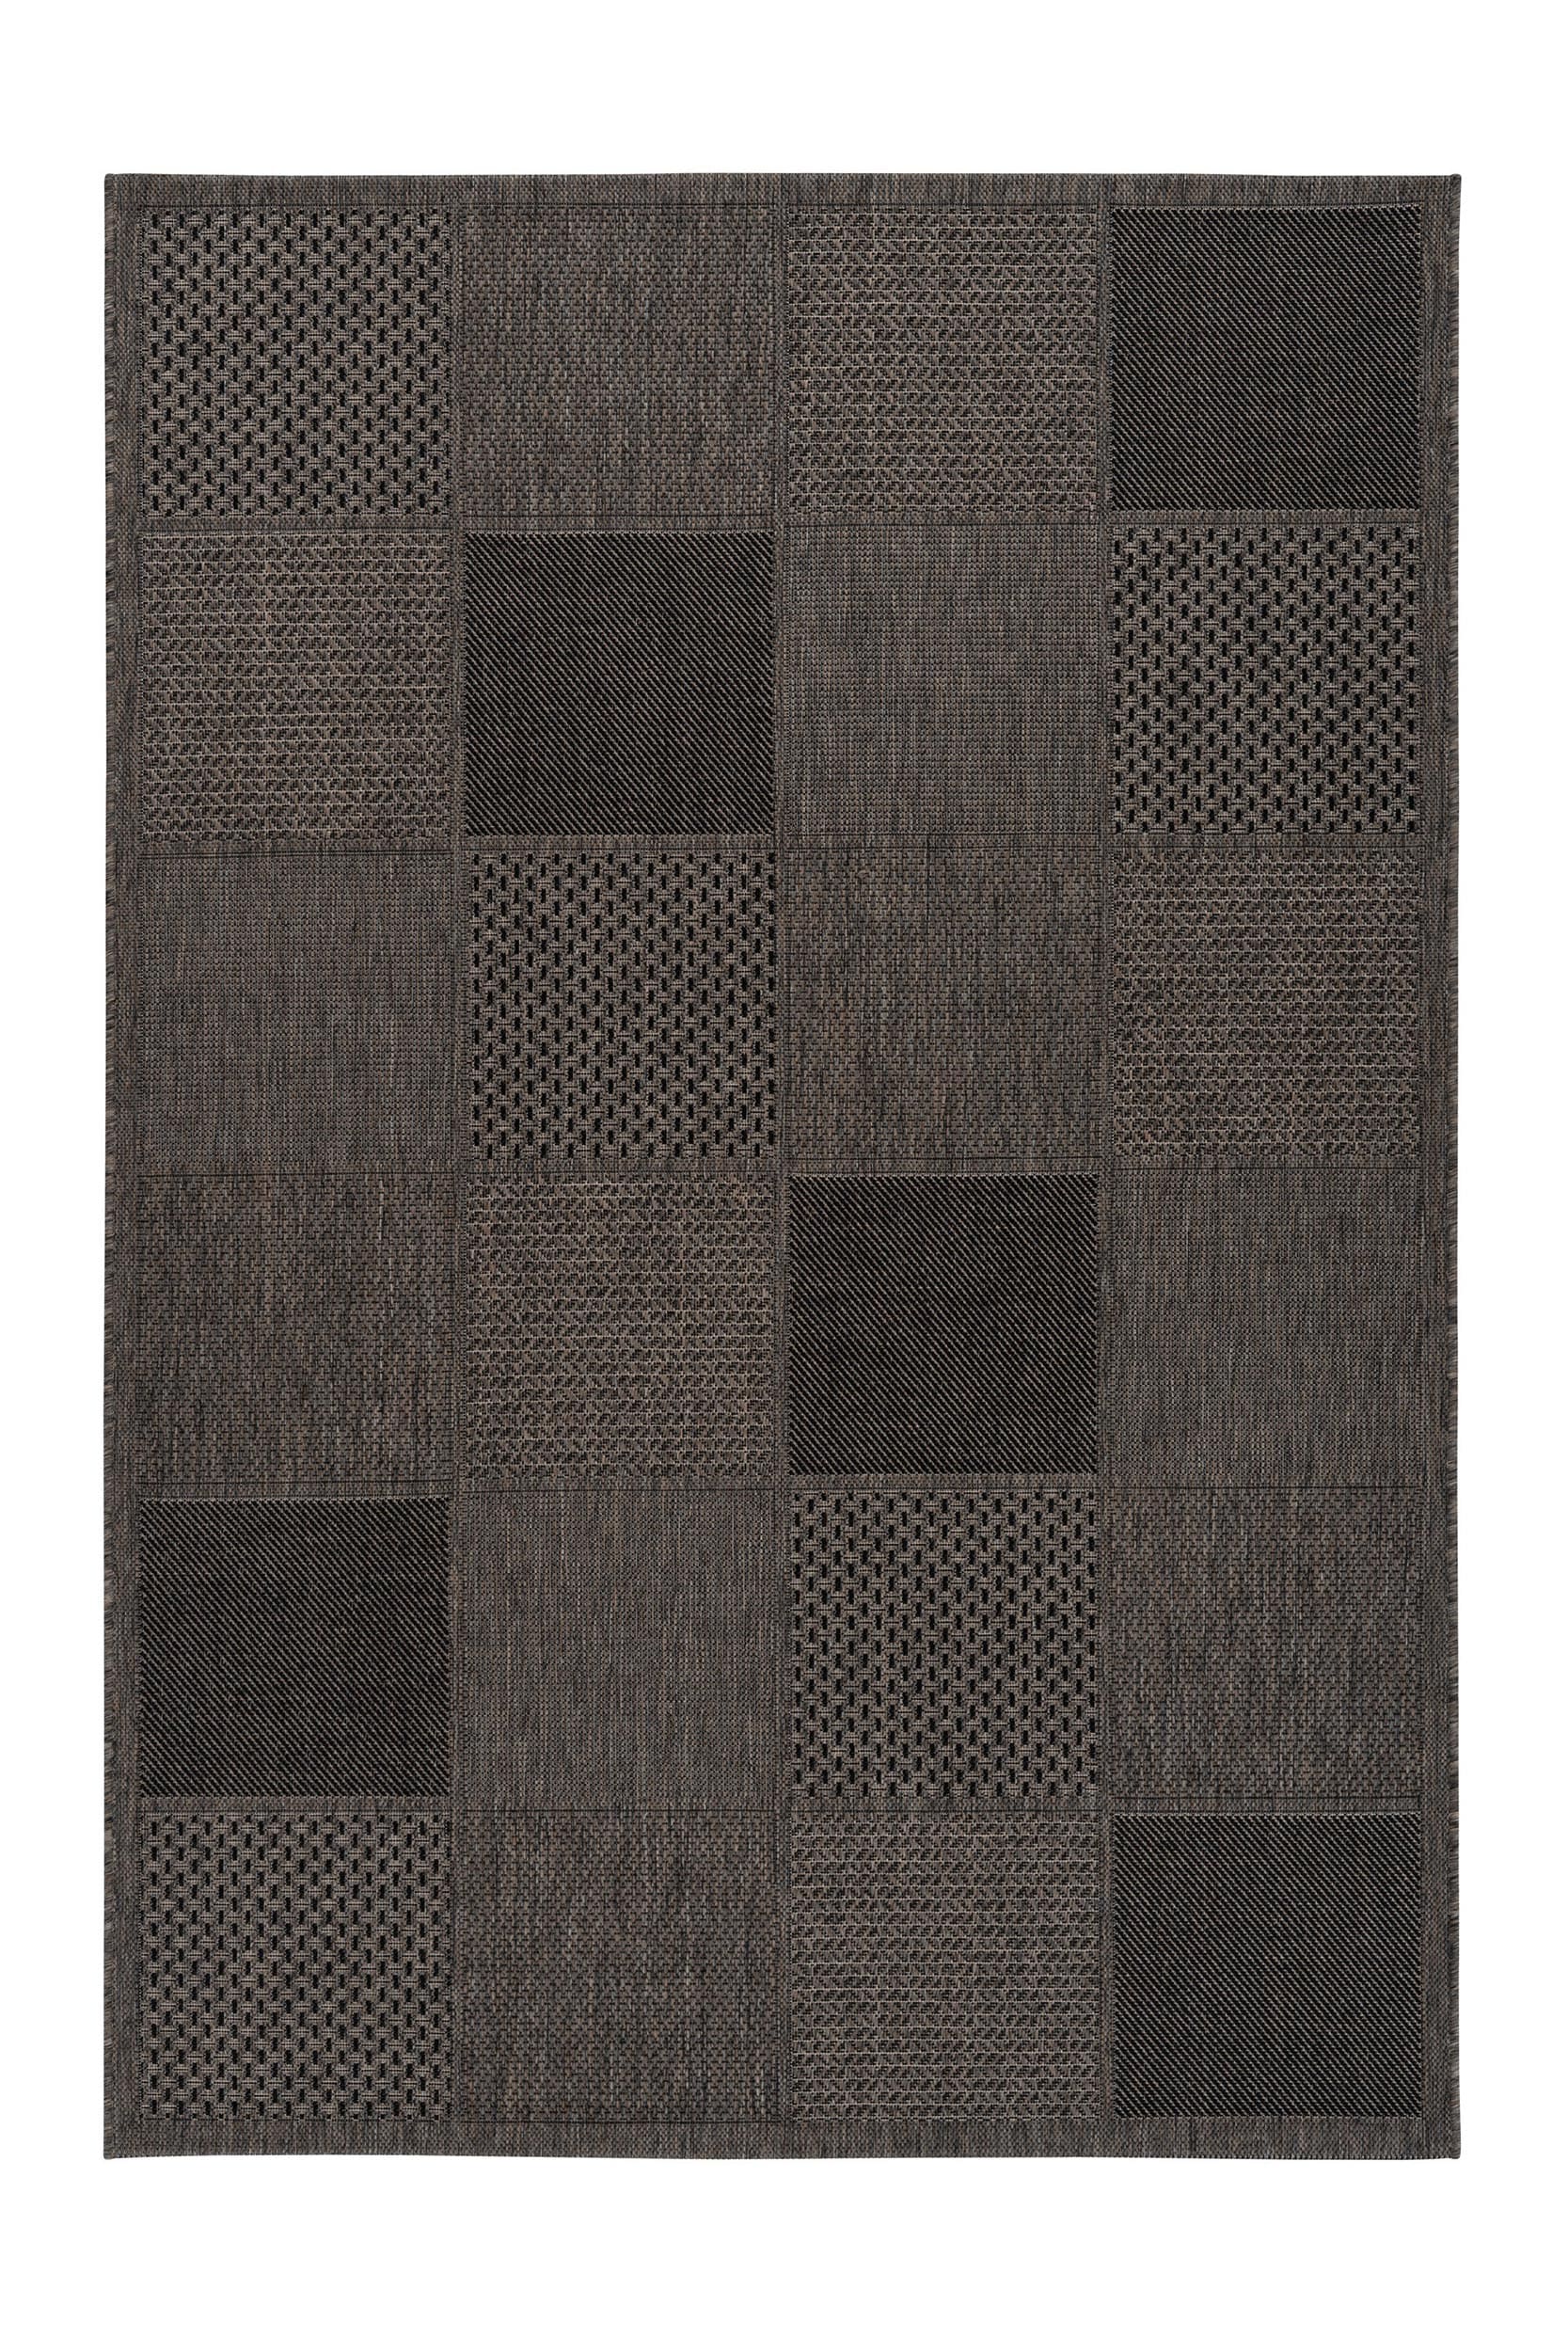 Outdoor Teppich "Sunmotion" taupe, 120x170cm